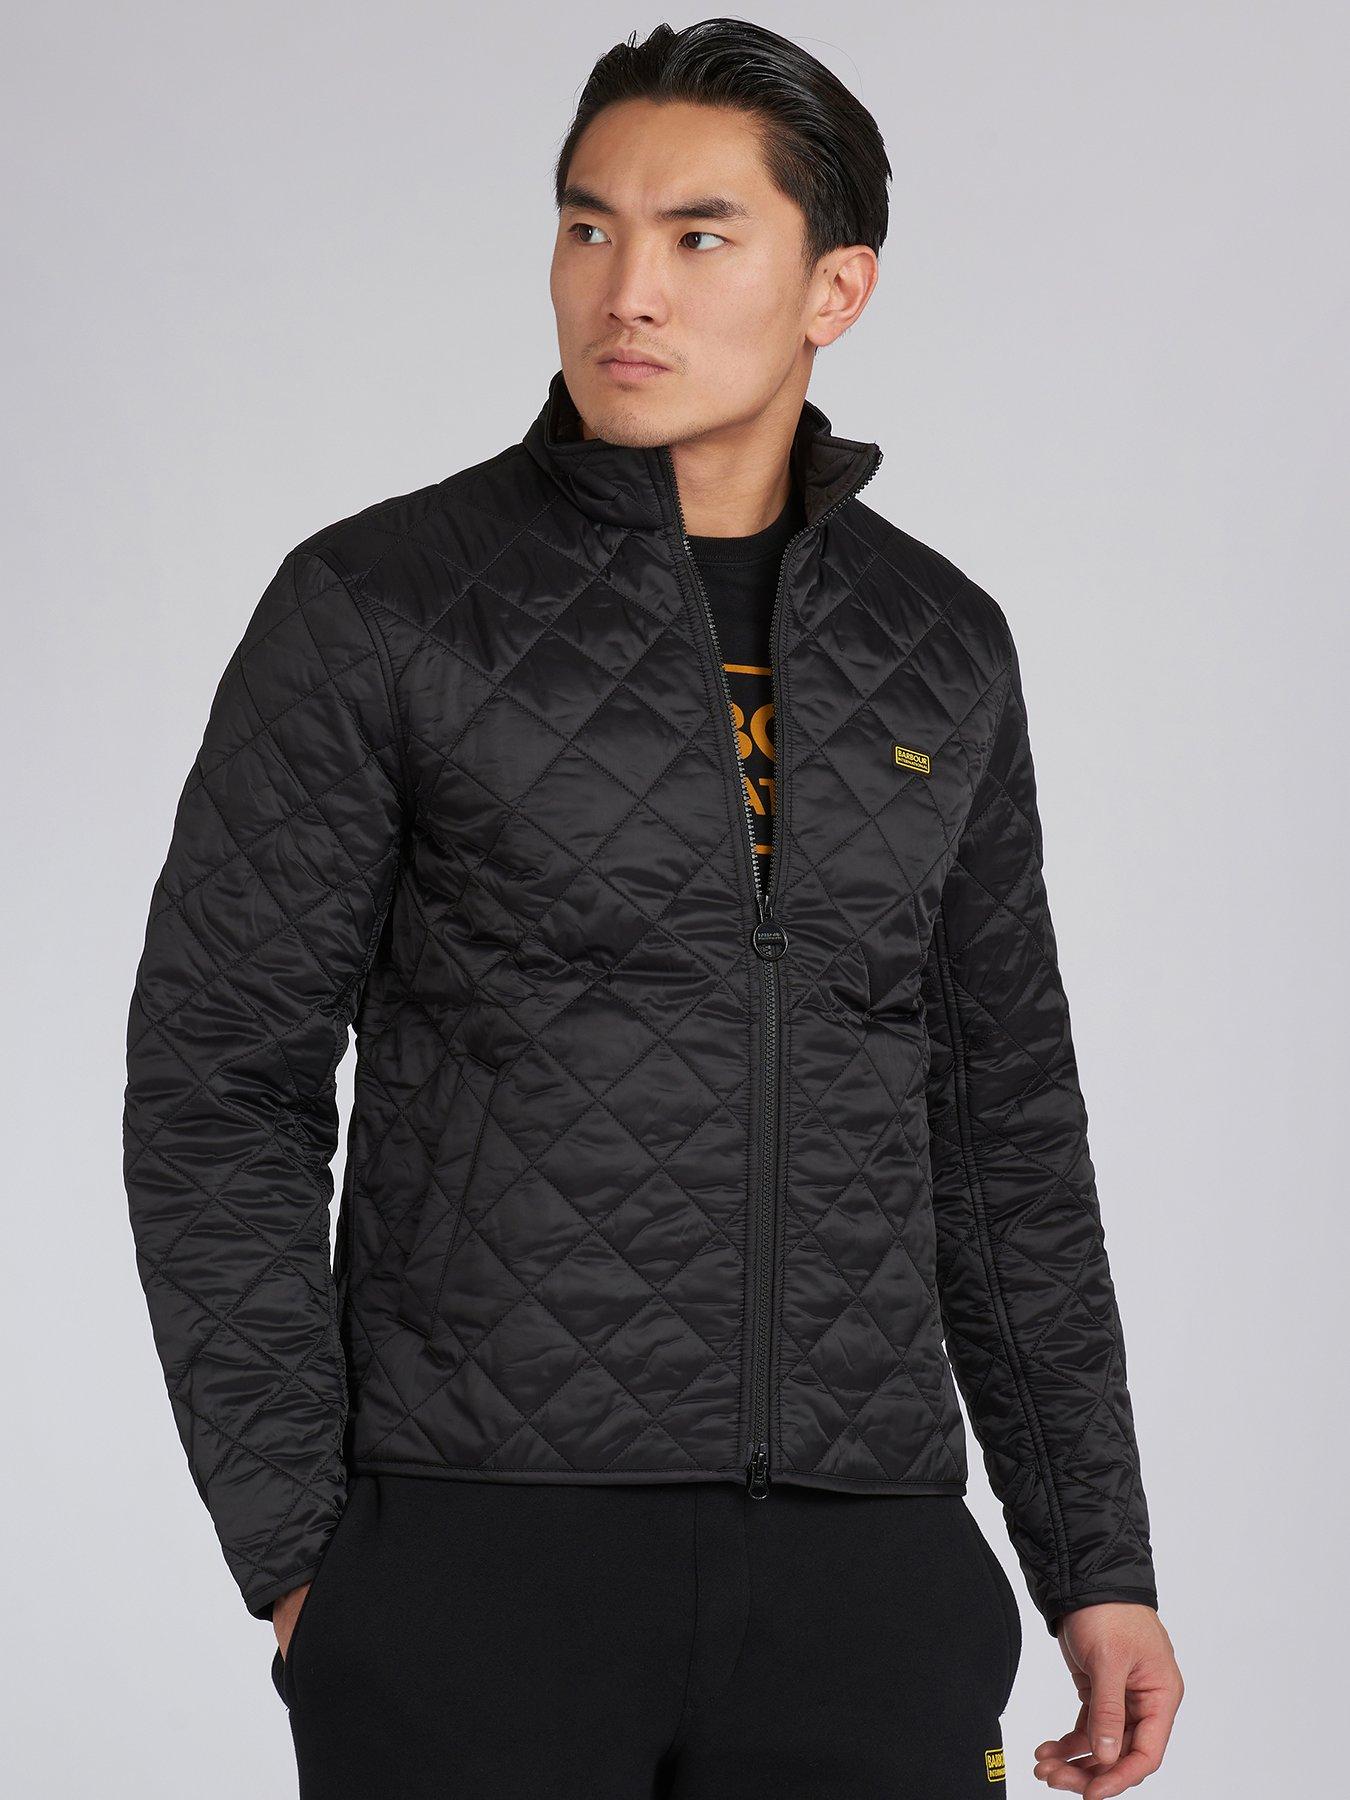 barbour international quilted